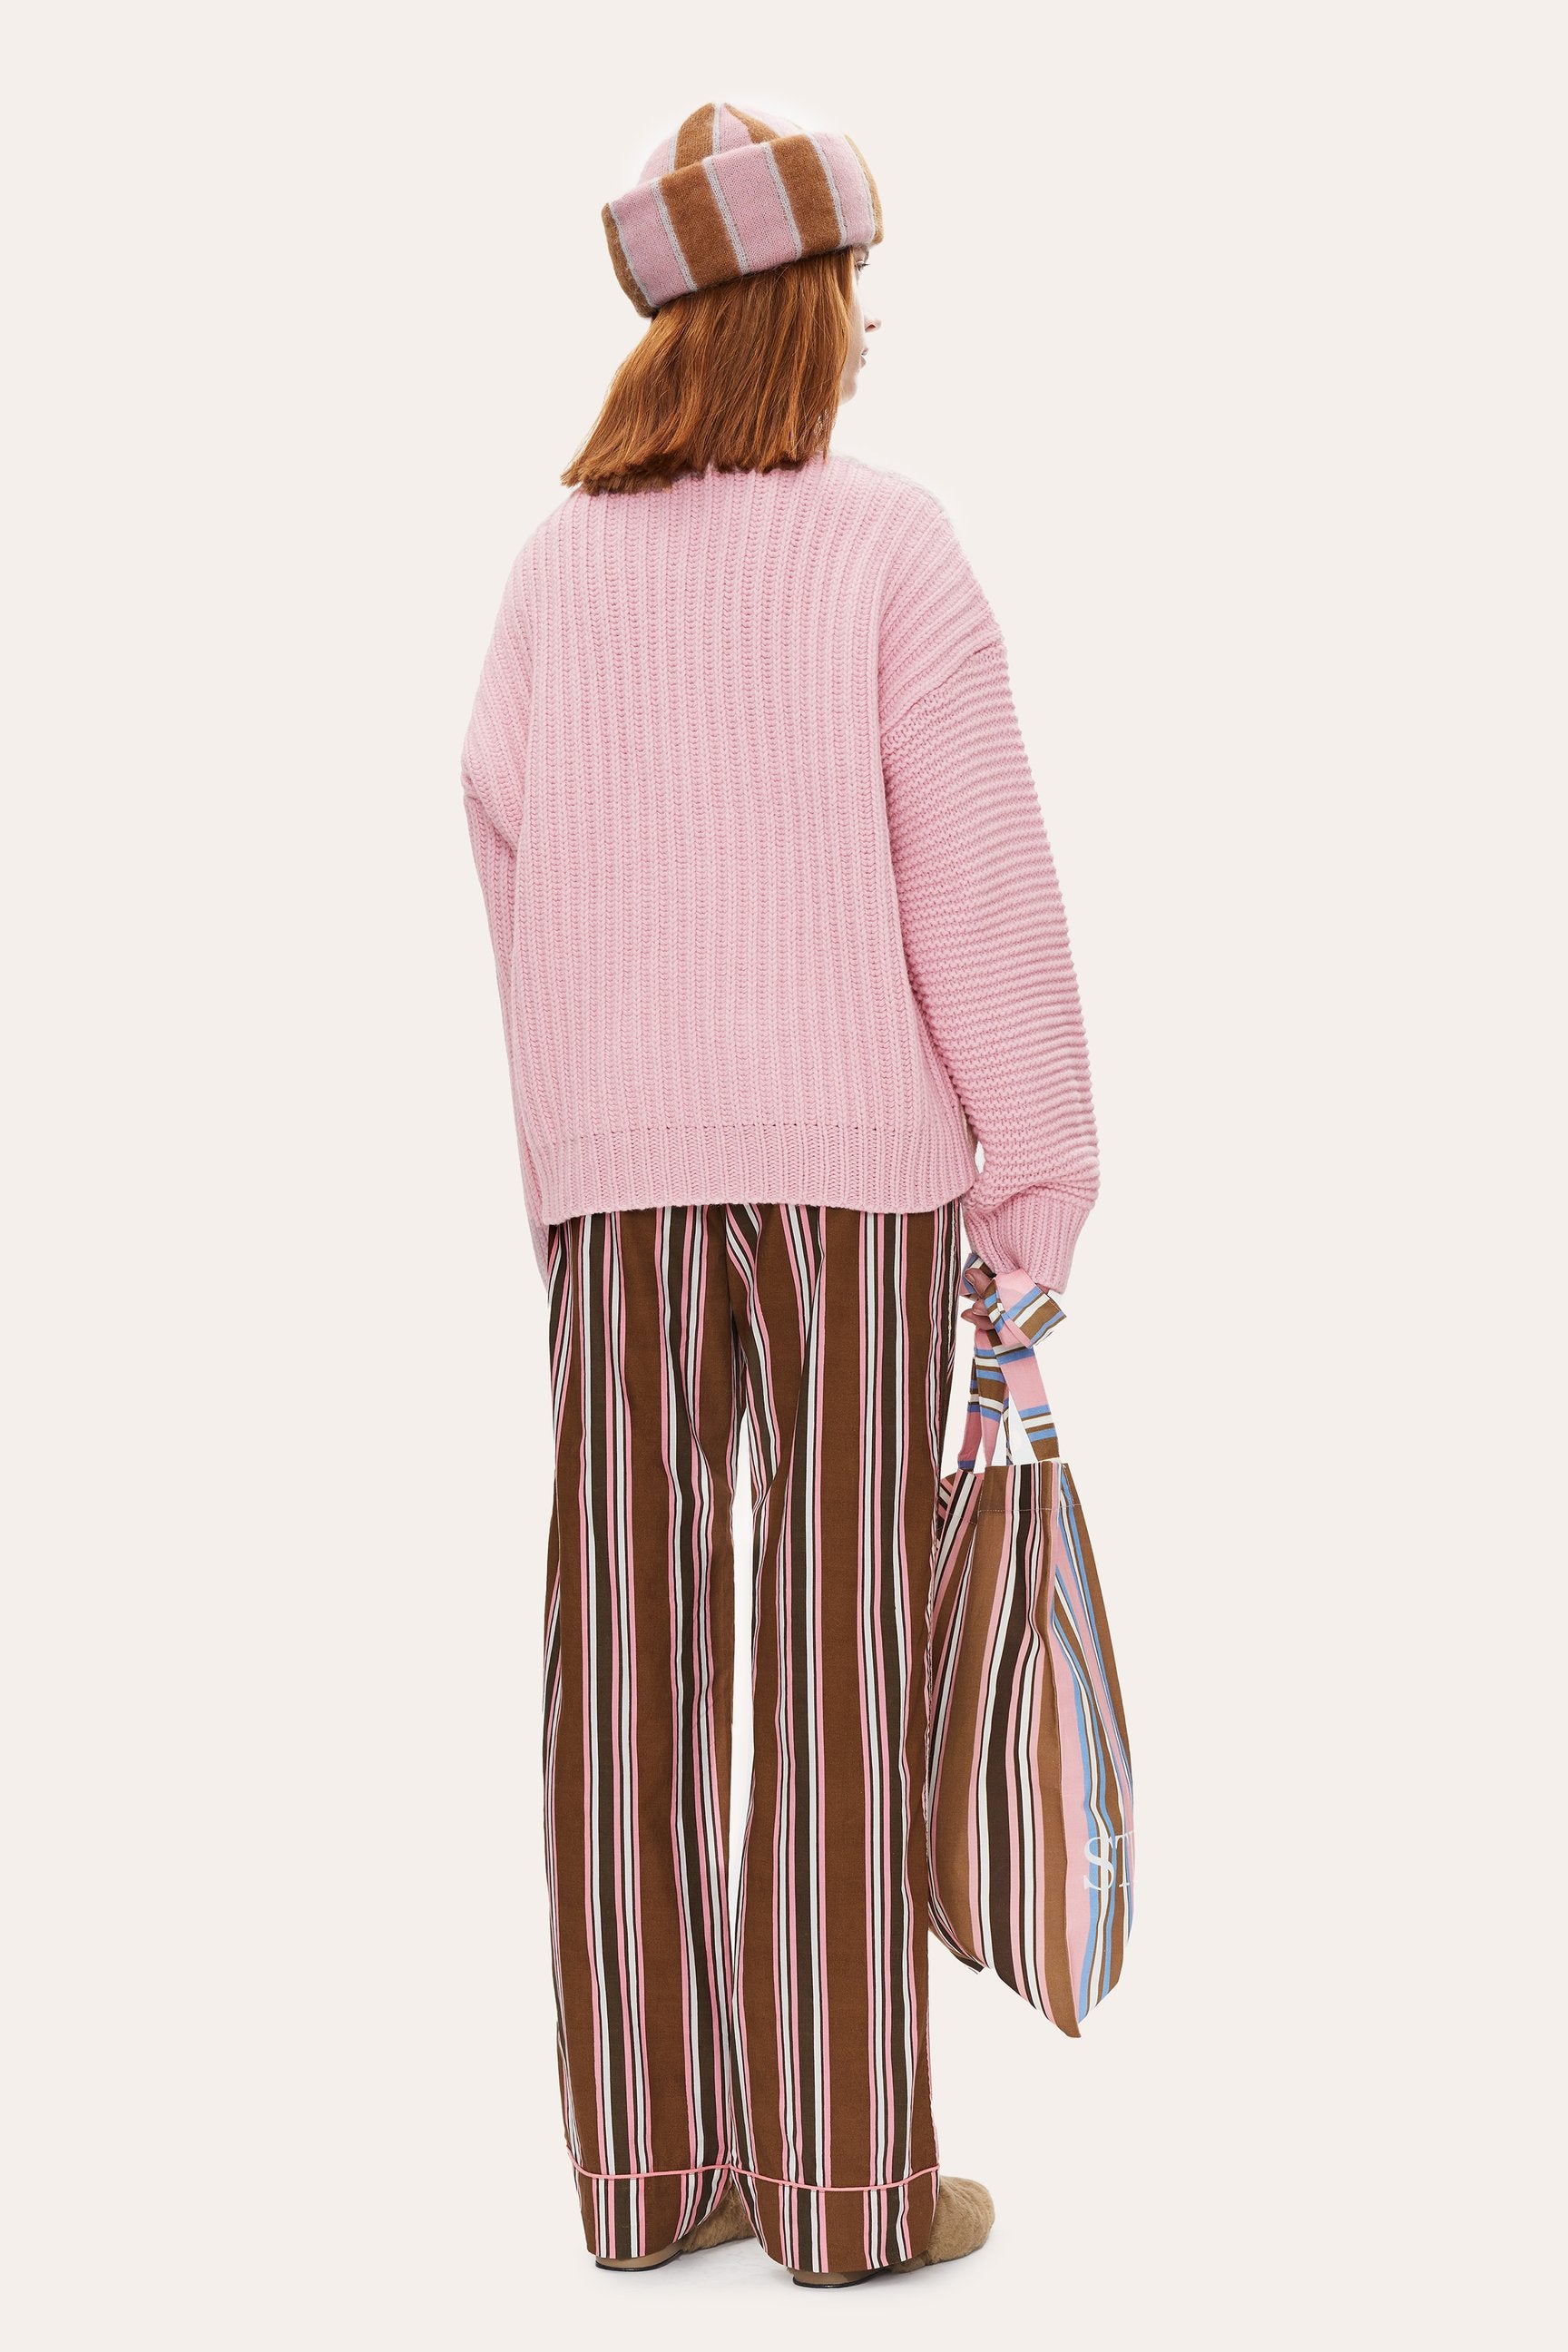 Blanci Sweater Colour Block - Babs The Label